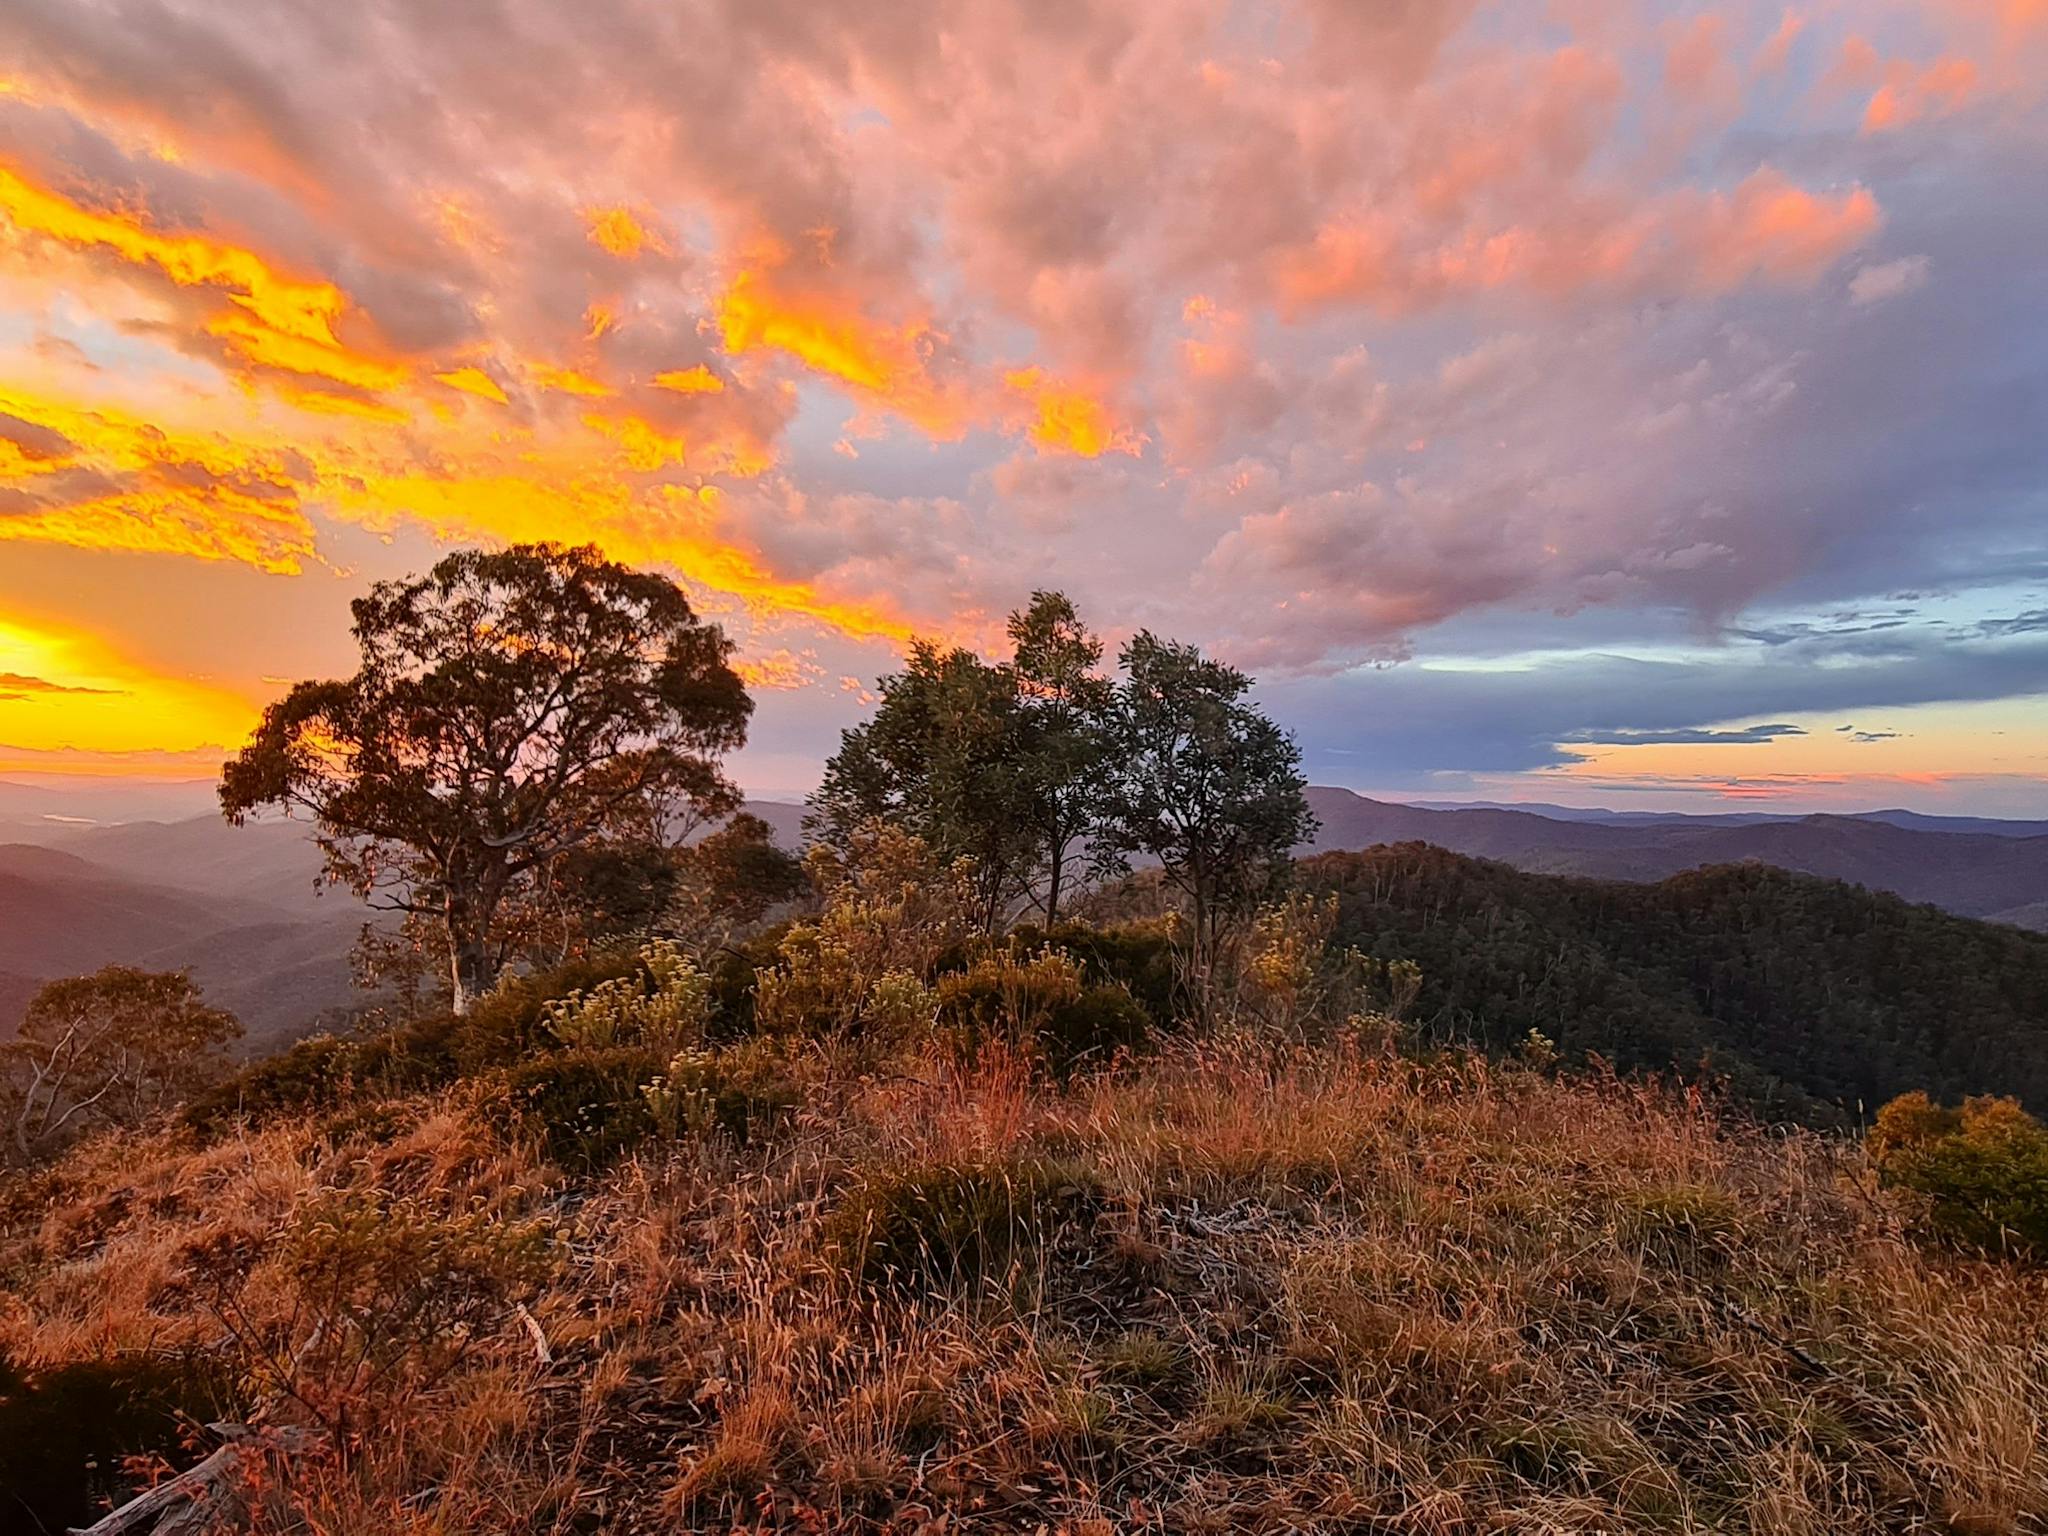 From Eagles Peaks, beautiful yellow and orange sunset colours spread across the sky.